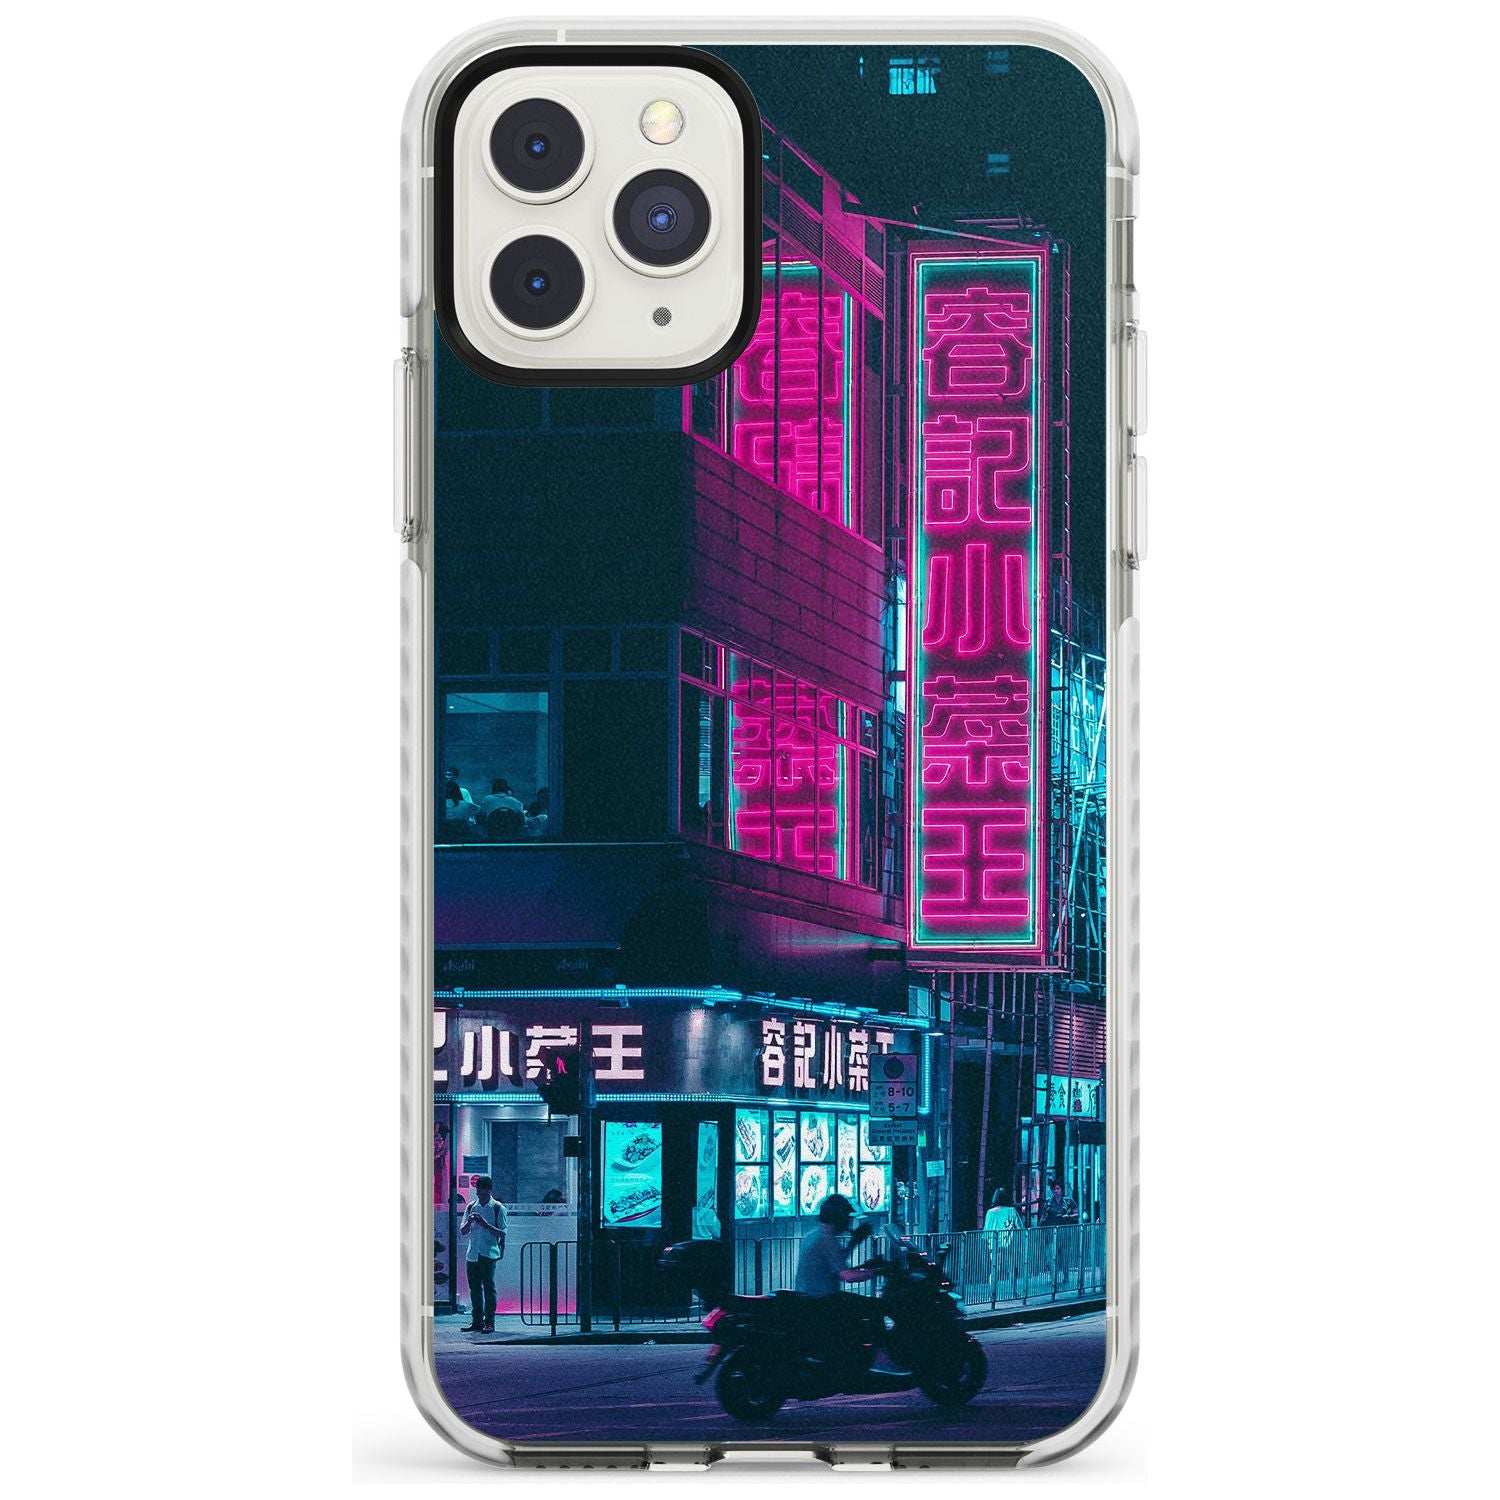 Motorcylist & Signs - Neon Cities Photographs Impact Phone Case for iPhone 11 Pro Max